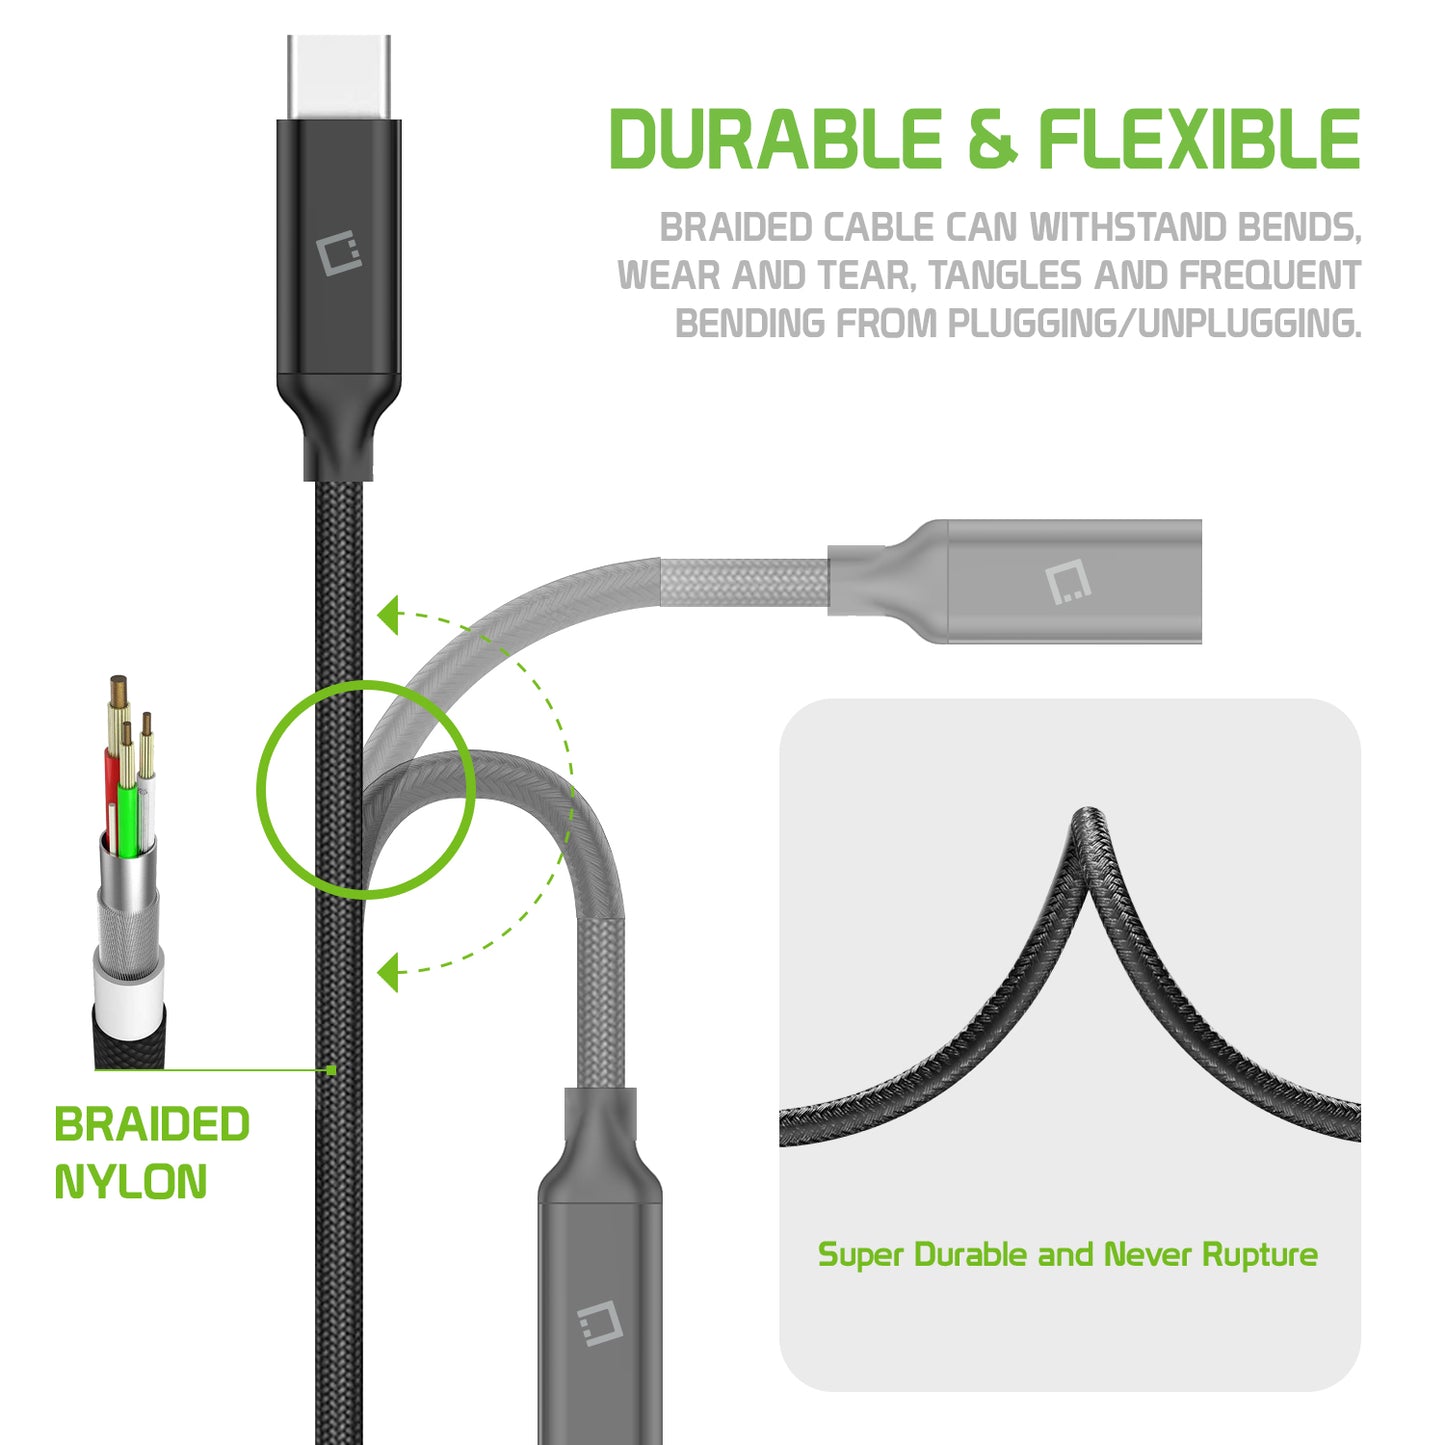 DCCEXT - USB-C Extension Cable,  Braided USB-C Male to USB-C Female Cable Compatible to All USB-C Device 3.3ft (1m)